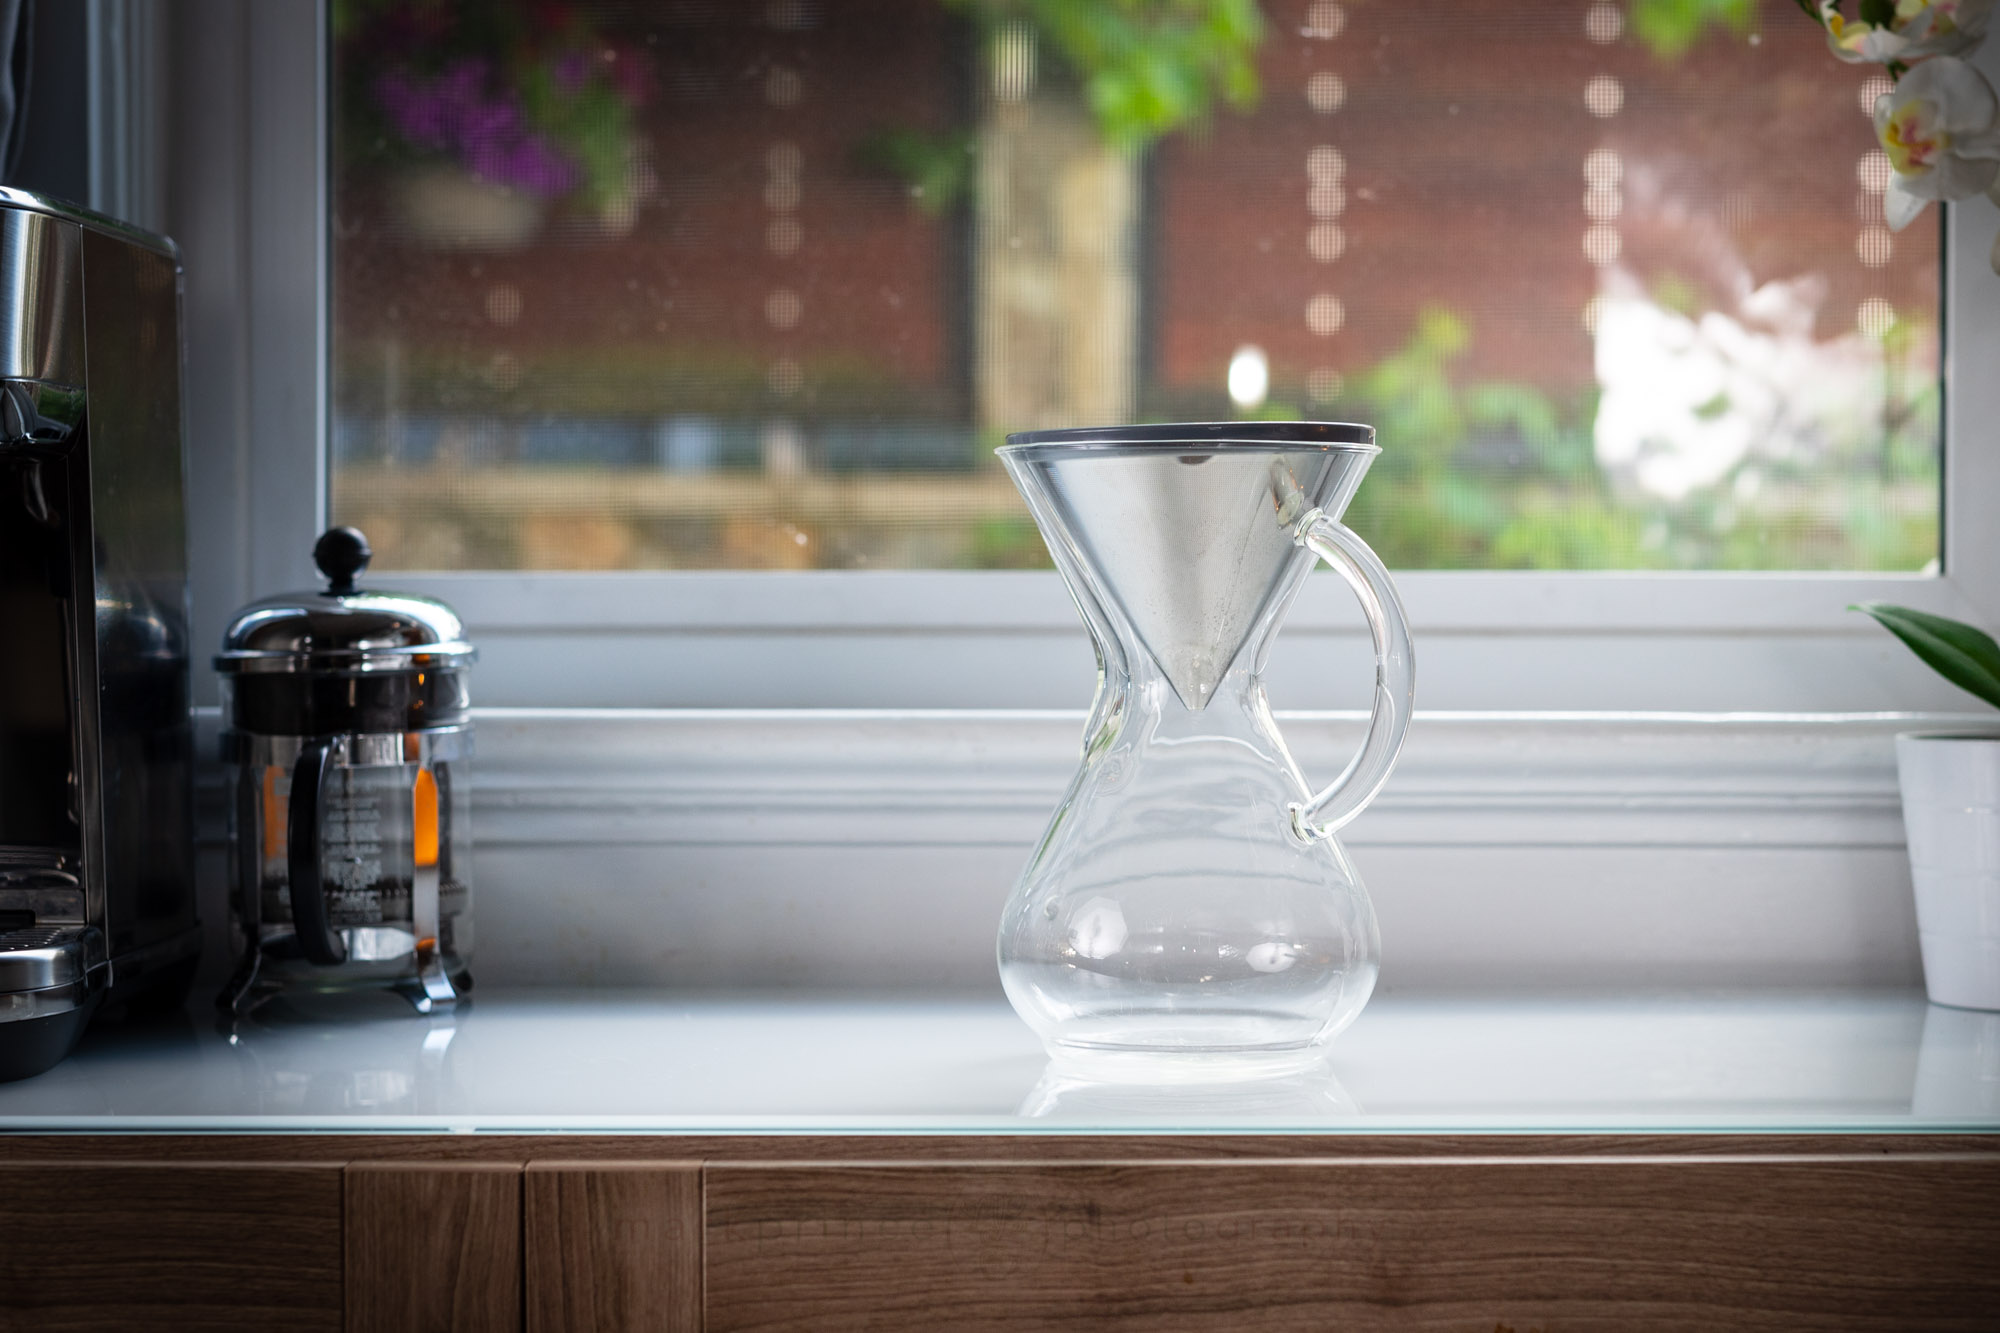  Coffee USA Glass Pour Over Coffee Maker - 4 Cup